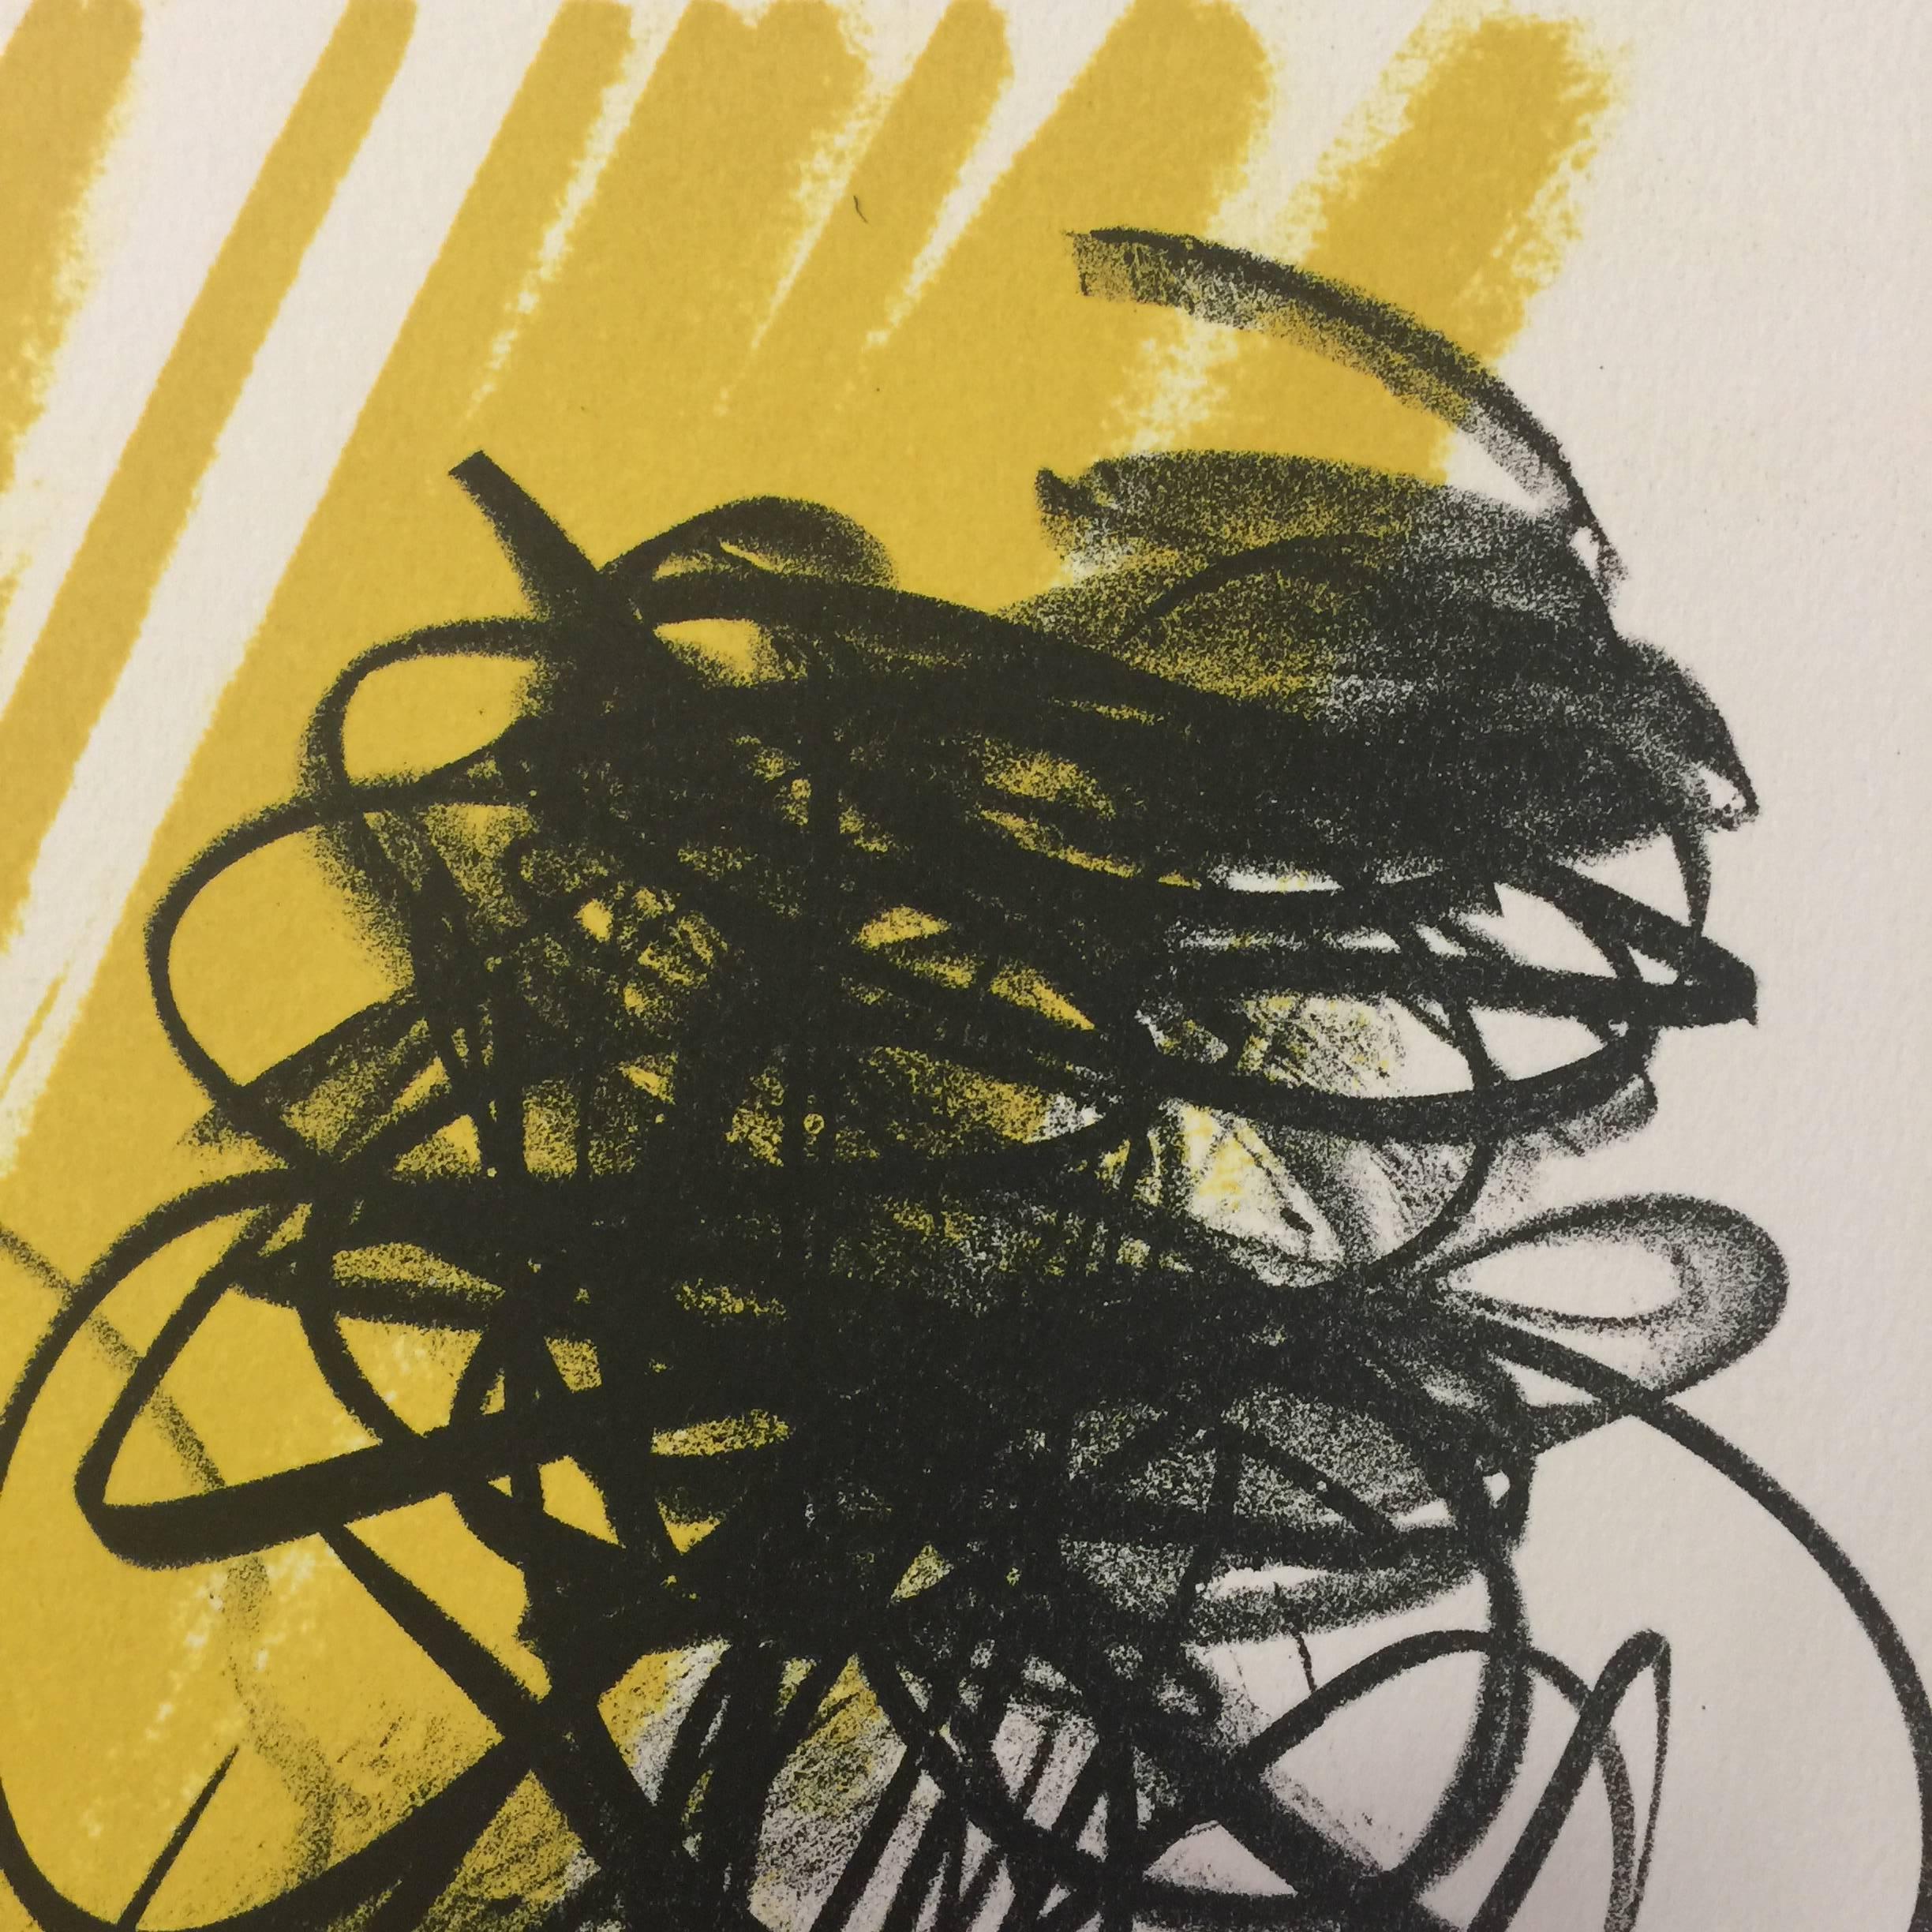 Abstract Composition - Signs on Yellow - Print by Hans Hartung